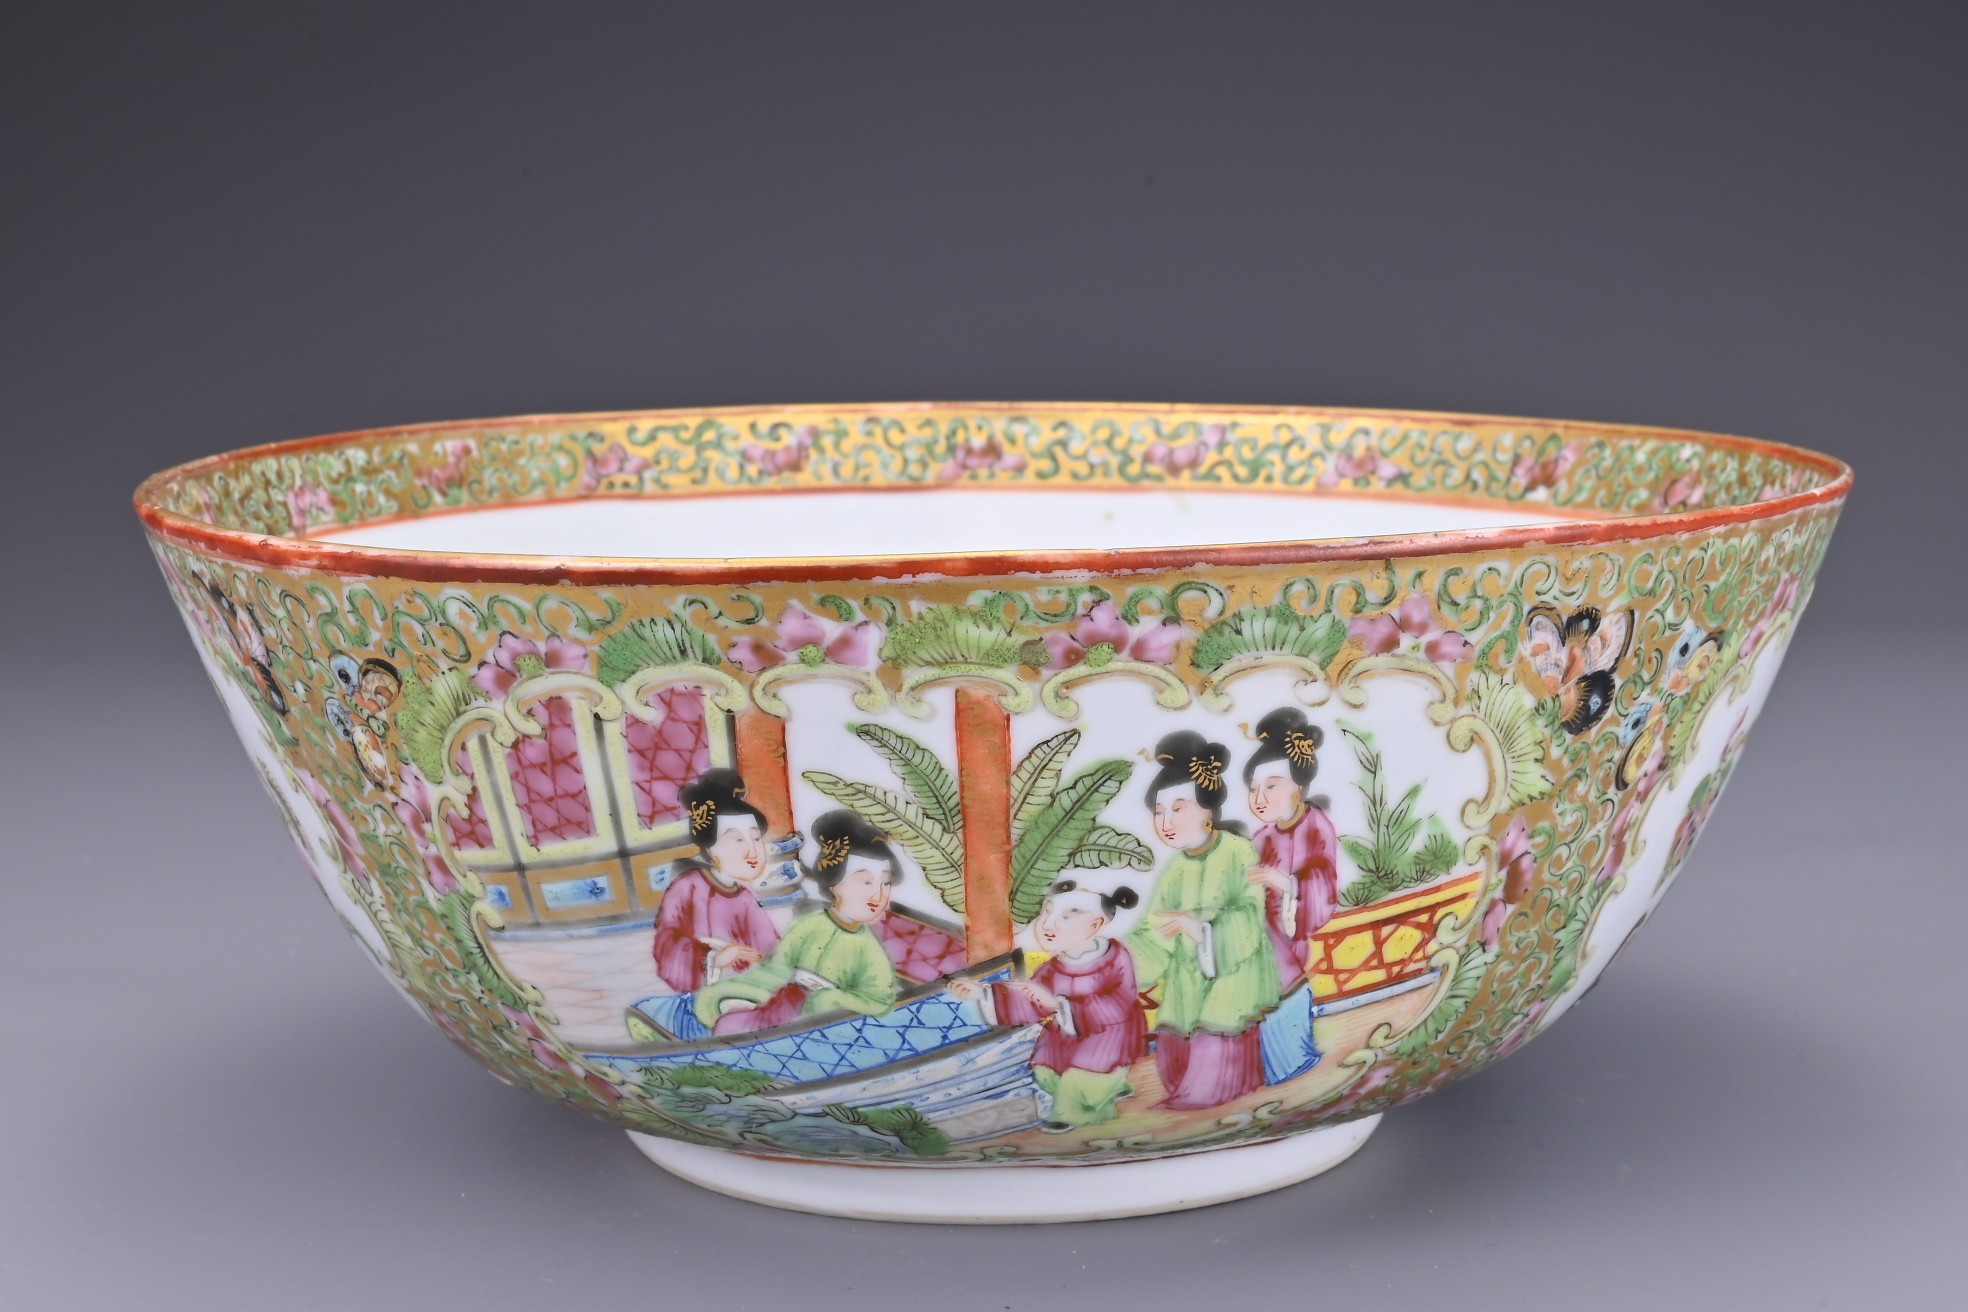 A CHINESE CANTON FAMILLE ROSE PORCELAIN BOWL, 19TH CENTURY. In the rose medallion pattern with - Image 2 of 9